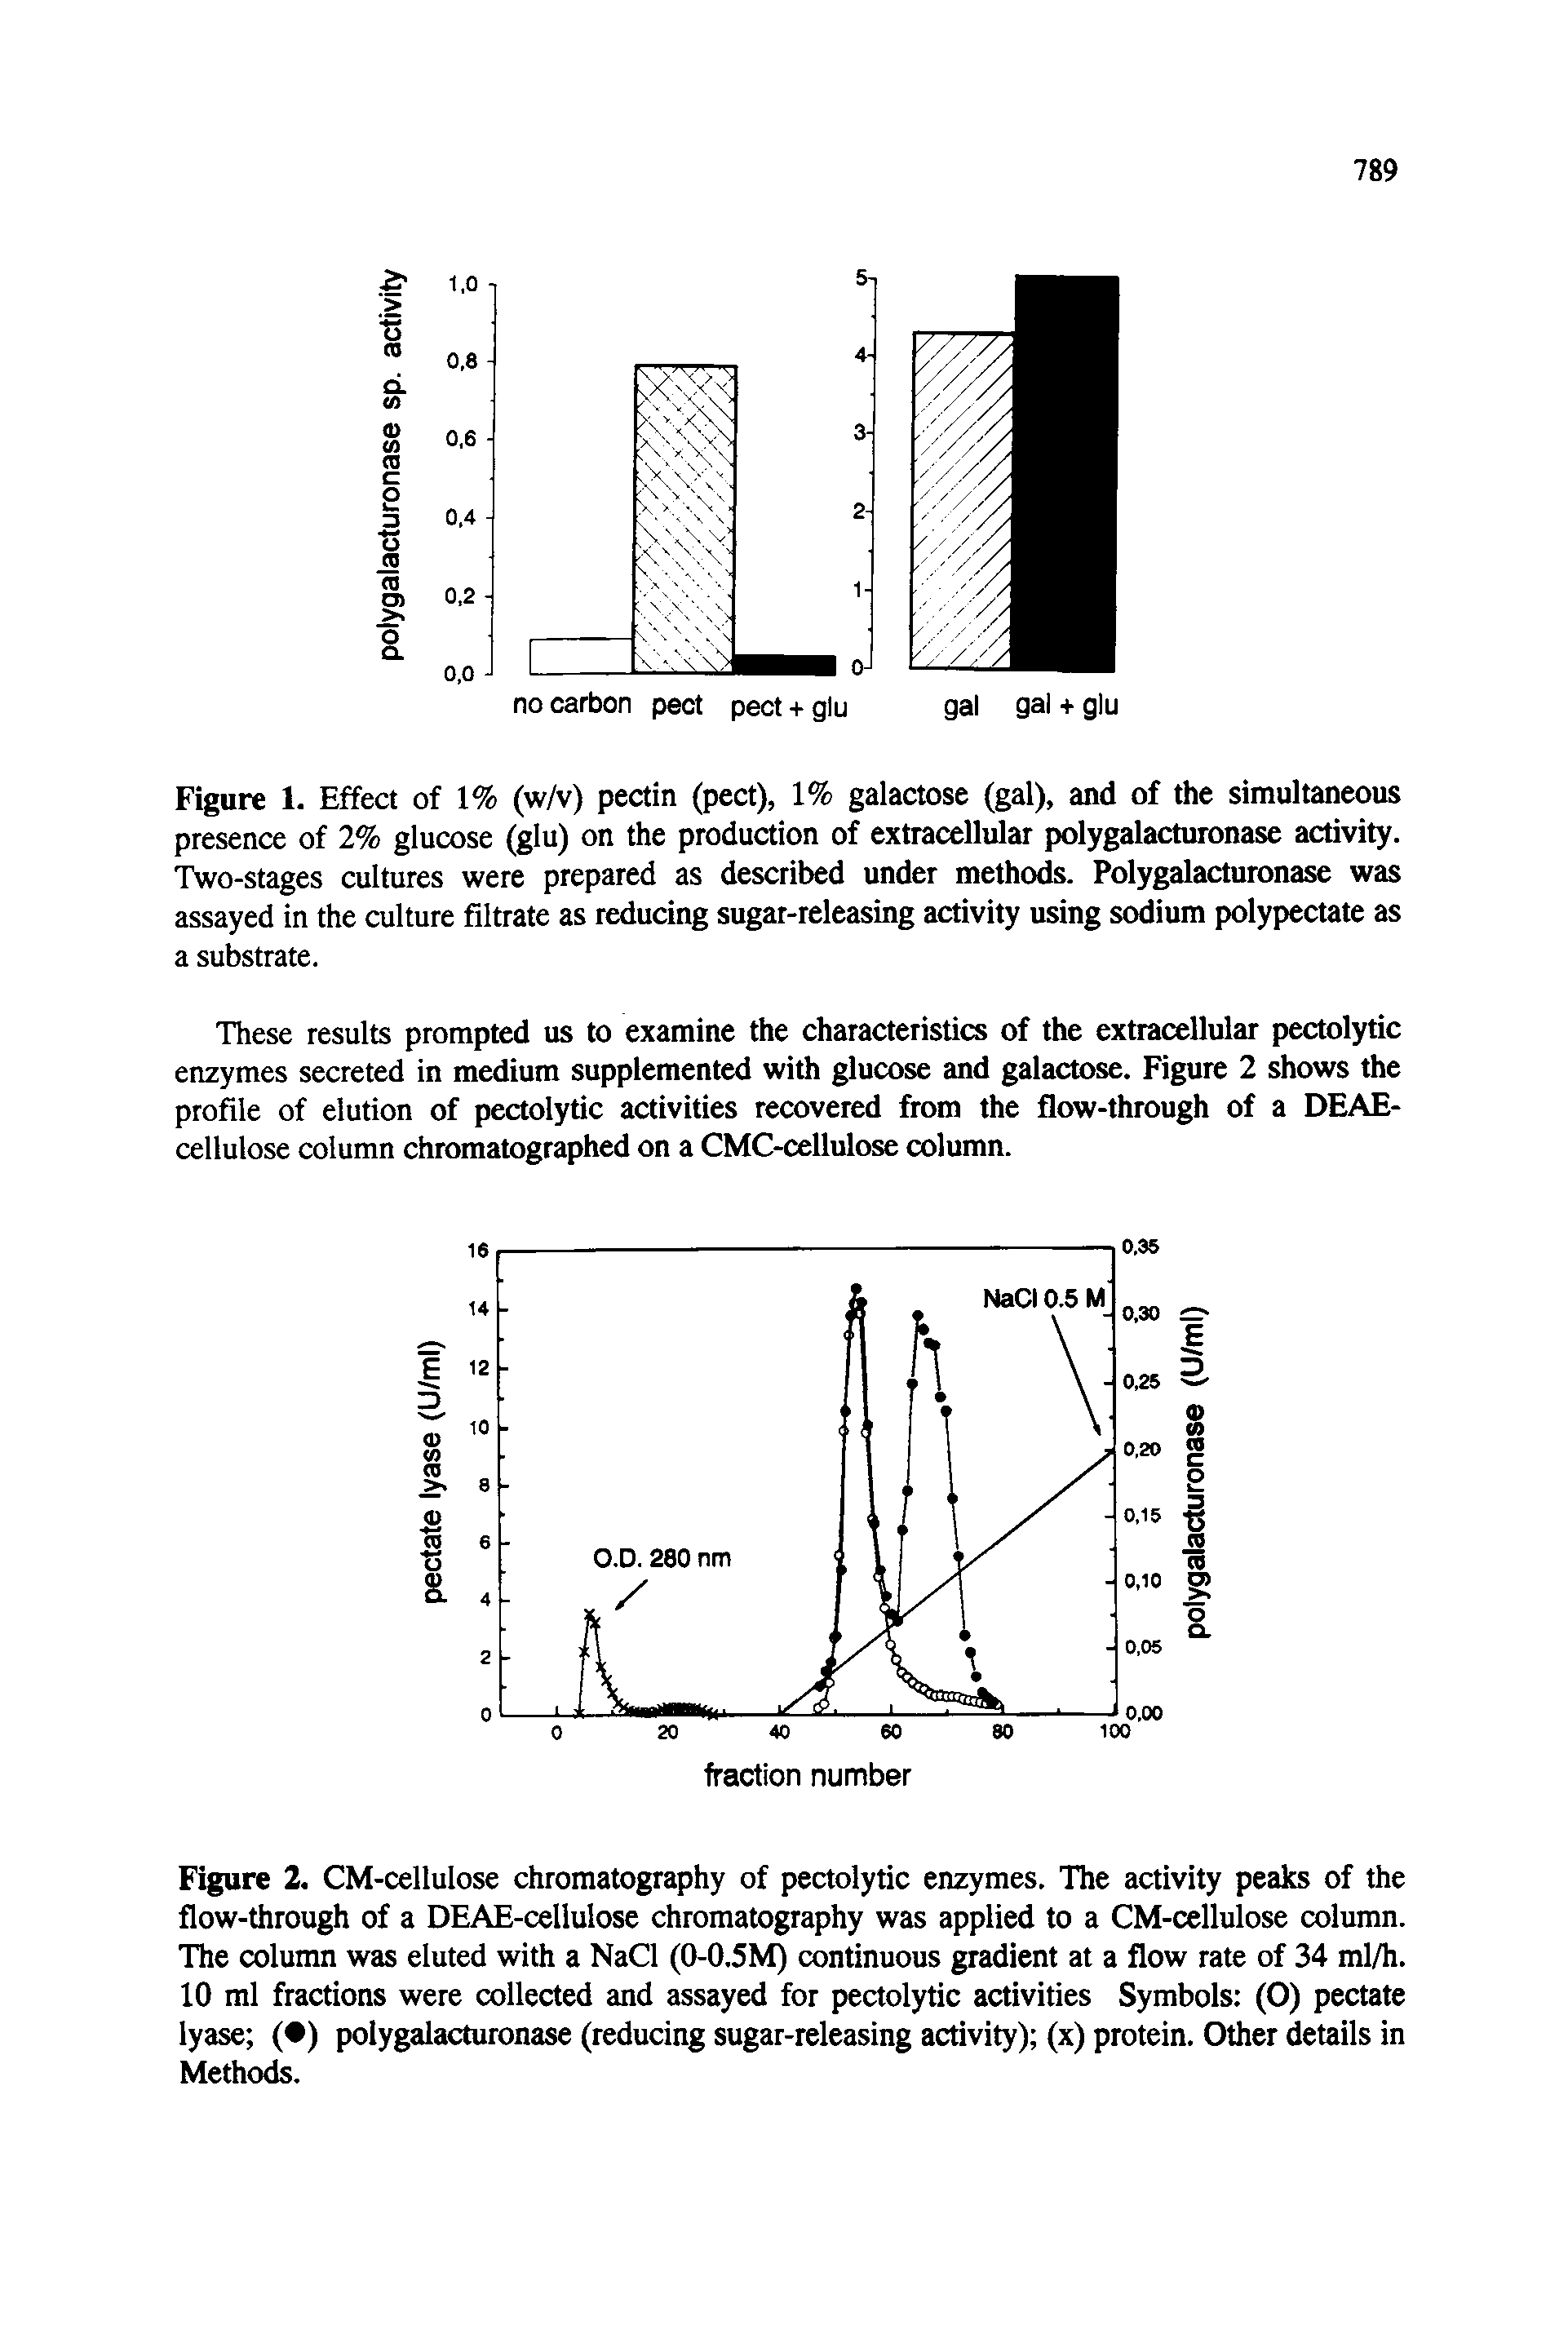 Figure 1. Effect of 1% (w/v) pectin (pect), 1% galactose (gal), and of the simultaneous presence of 2% glucose (glu) on the production of extracellular polygalacturonase activity. Two-stages cultures were prepared as described under methods. Polygalacturonase was assayed in the culture filtrate as reducing sugar-releasing activity using sodium polypectate as a substrate.